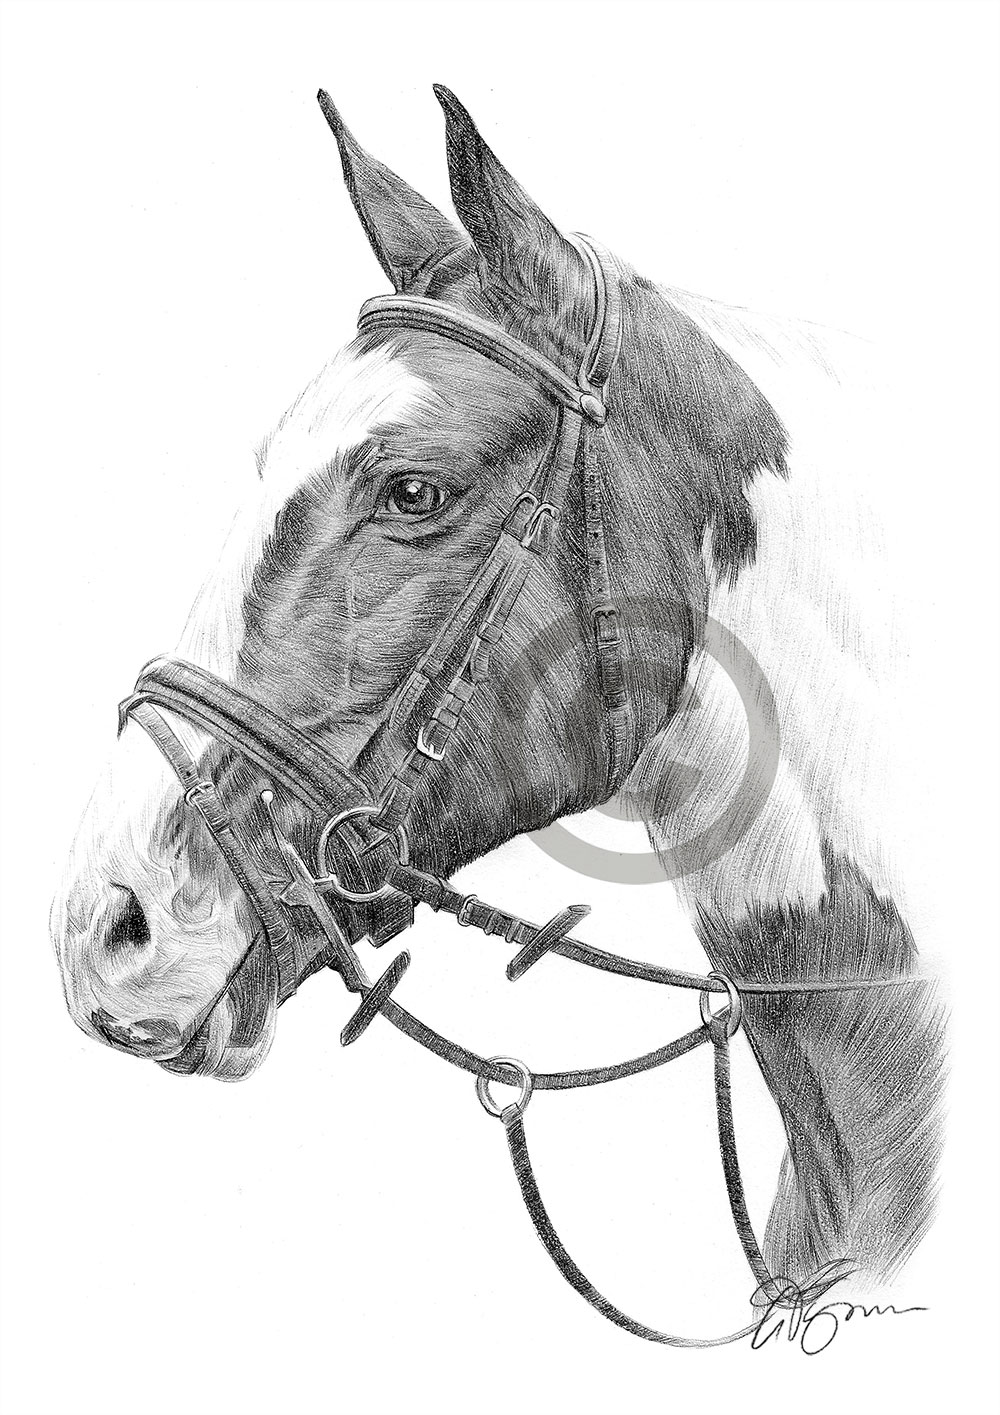 Pencil drawing of a brown and white horse by artist Gary Tymon